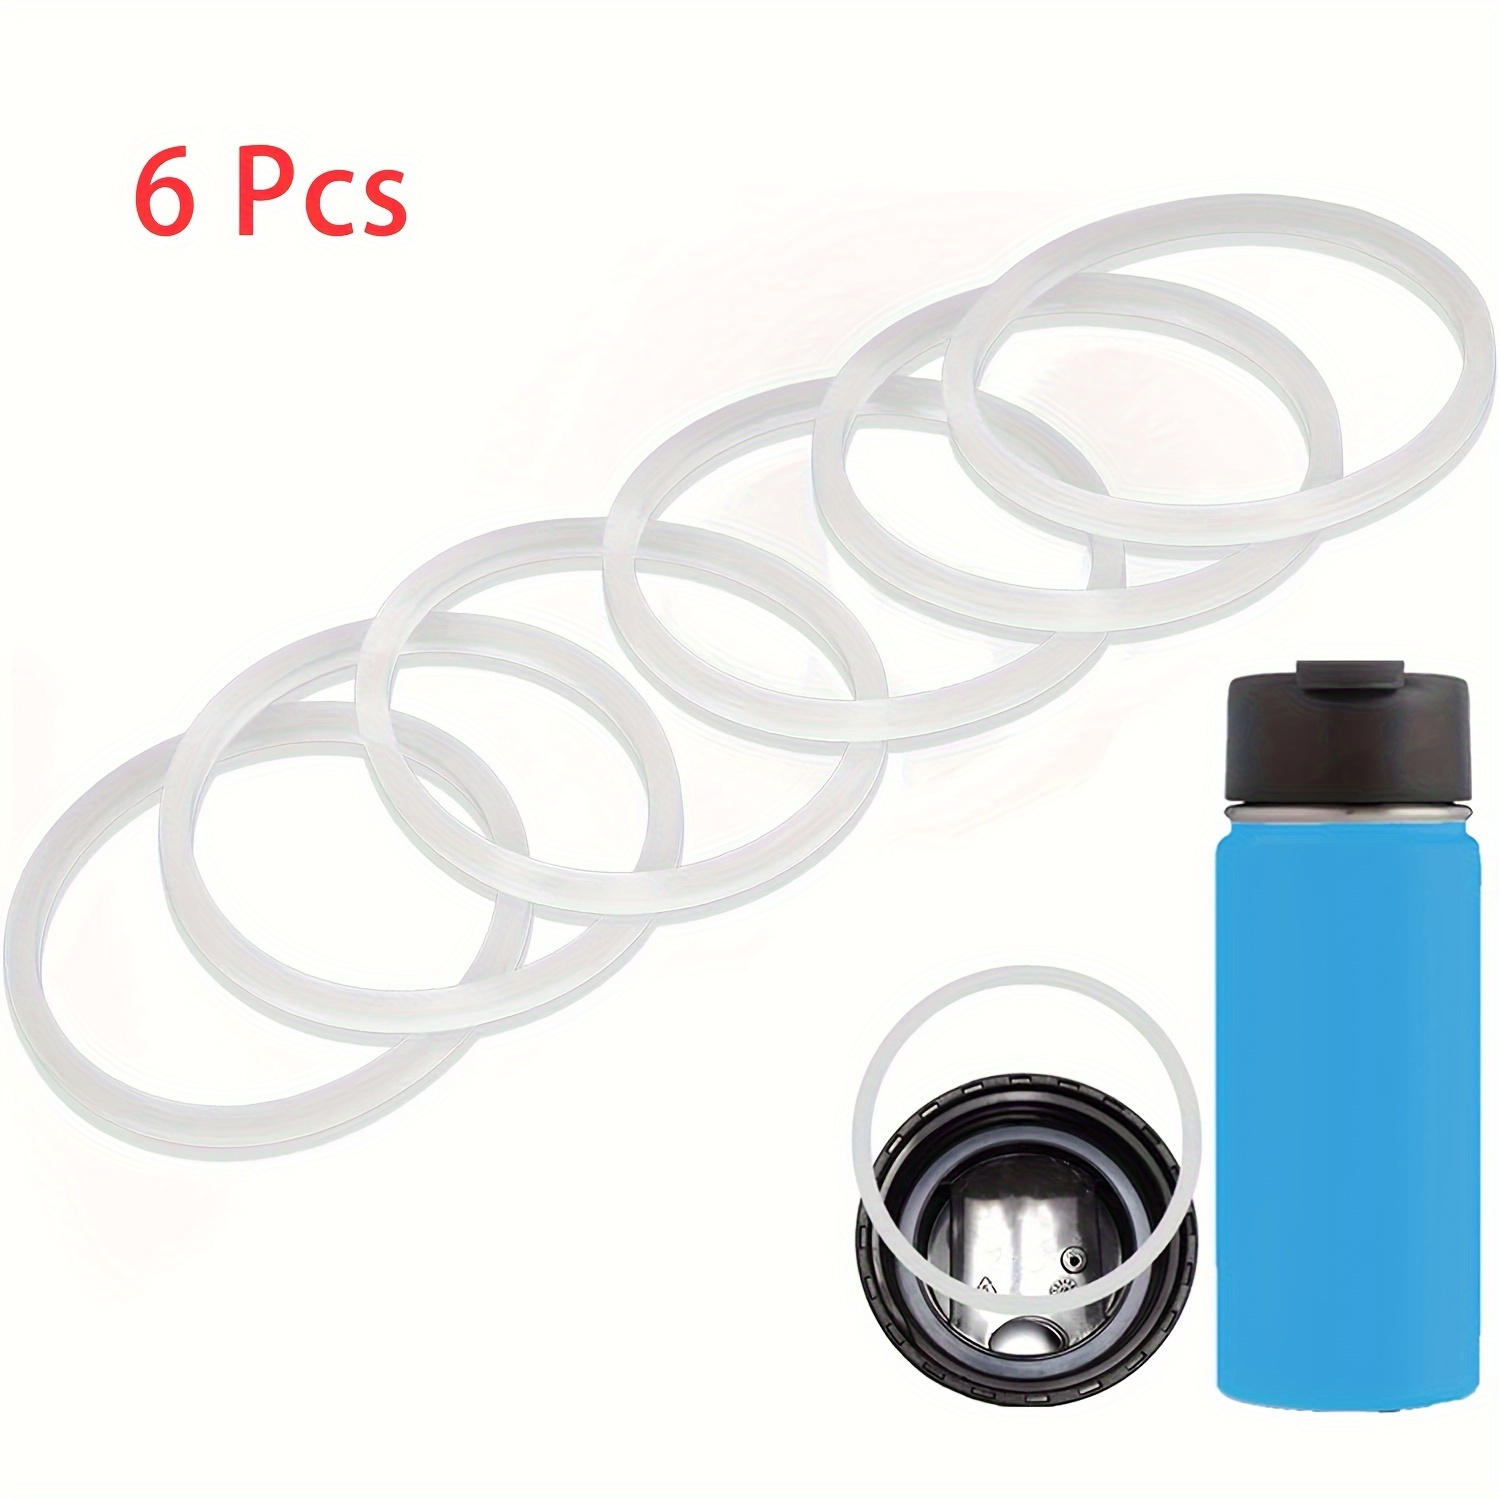 10Pcs Vacuum Bottle Mug Stopper Cup Flask Cover Safety Sealing Gaskets Ring  Lids